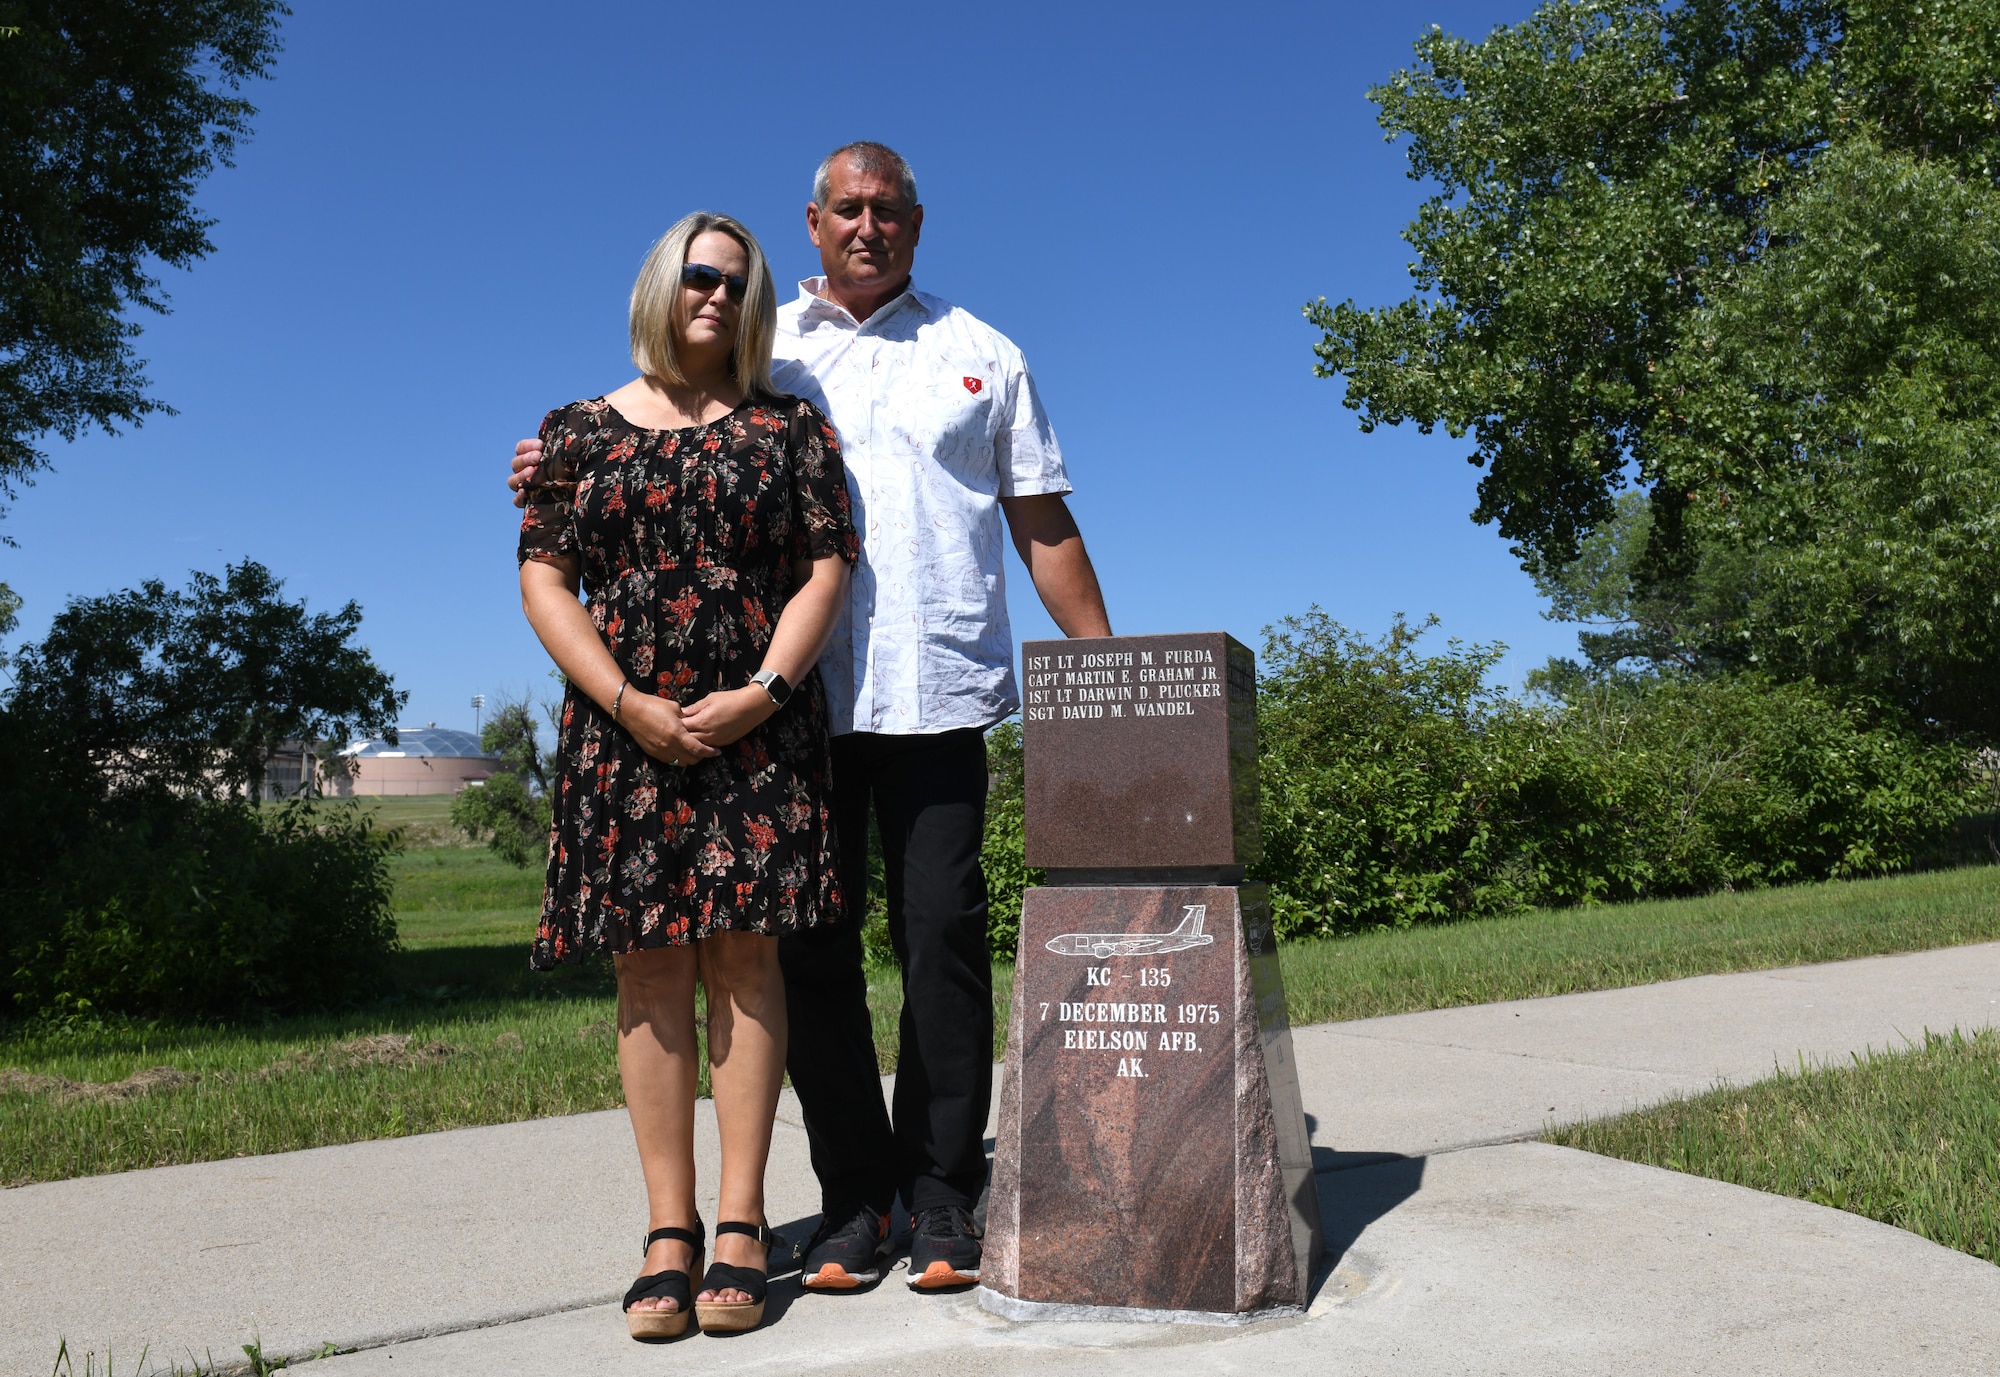 Jeff Wandel and his wife, Sandi, visit Ellsworth’s Memorial Park on Ellsworth Air Force Base, S.D., on July 30, 2019. In December 1975, Wandel and three of his fellow crewmembers – Capt. Martin E. Graham Jr., Capt. Joseph M. Furda and 1st Lt. Karwin M. Plucker – passed away in a plane crash just south of Eielson Air Force Base, Alaska. Wandel’s family spent several years searching for a memorial plaque dedicated to Wandel and his crew. (U.S. Air Force photo by Airman 1st Class Christina Bennett)